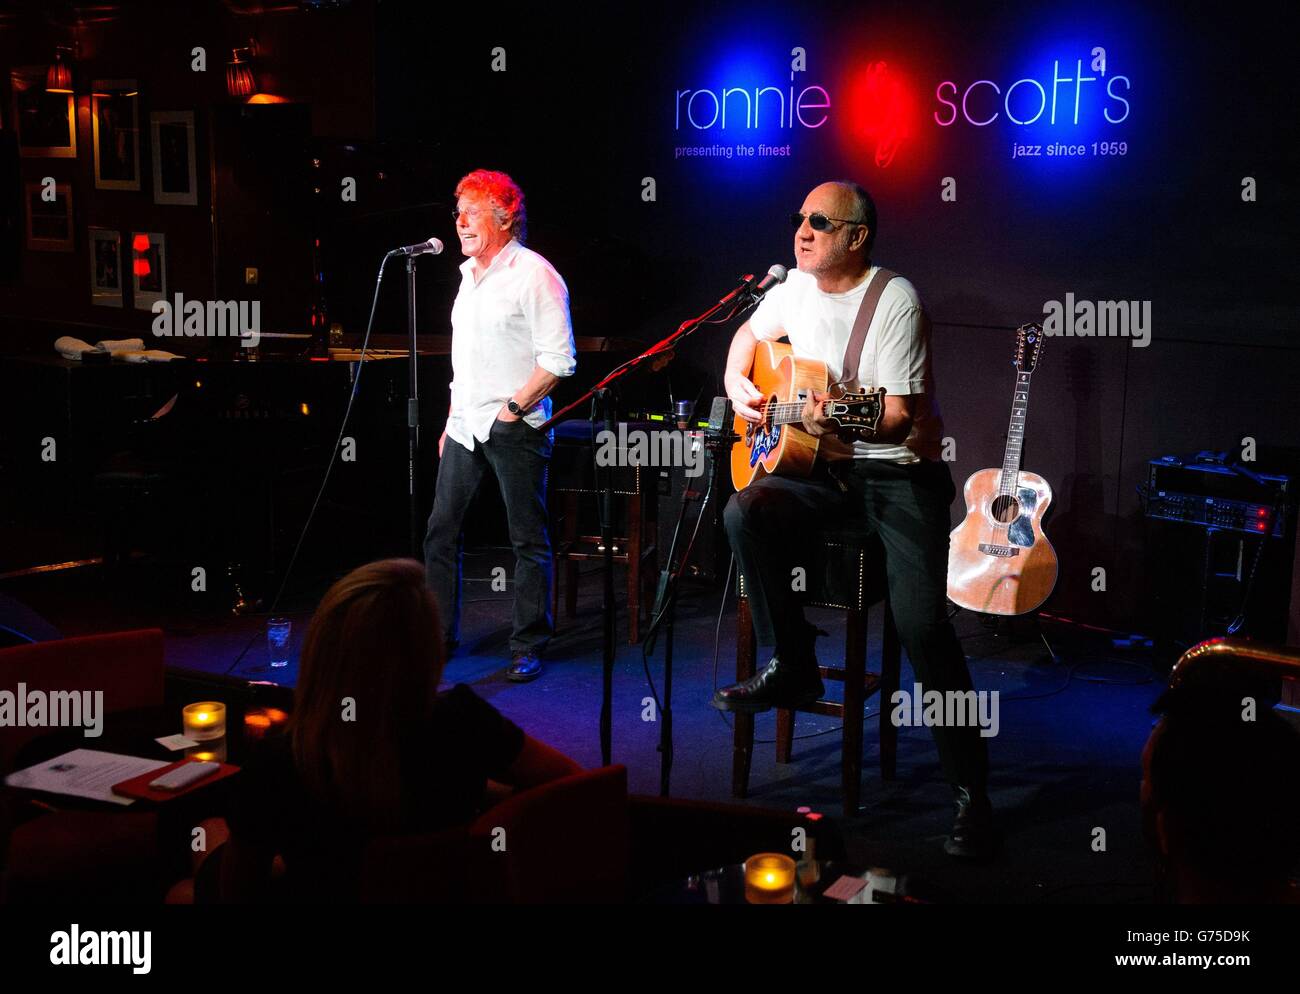 Roger Daltry (left) and Pete Townshend of the Who perform at Ronnie Scott's, in central London, at the launch of the 'The Who hits 50' tour. Stock Photo